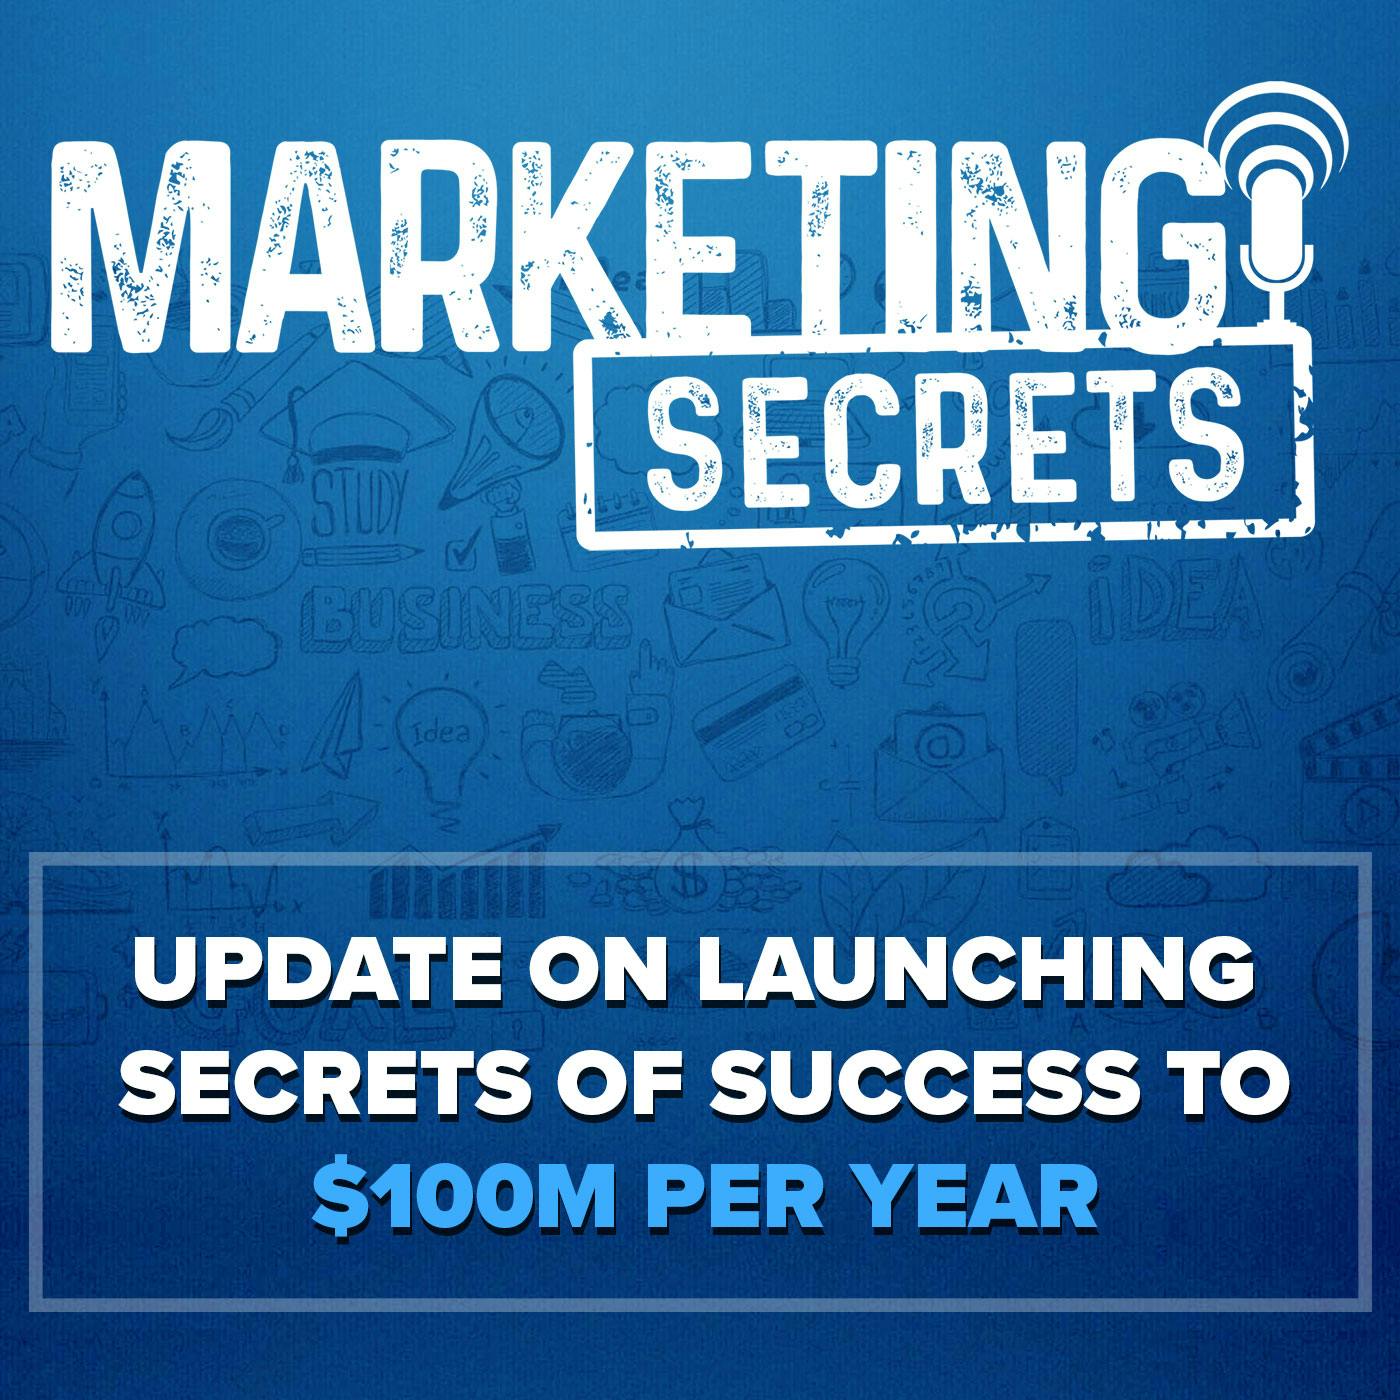 Update on Launching Secrets of Success to $100M Per Year